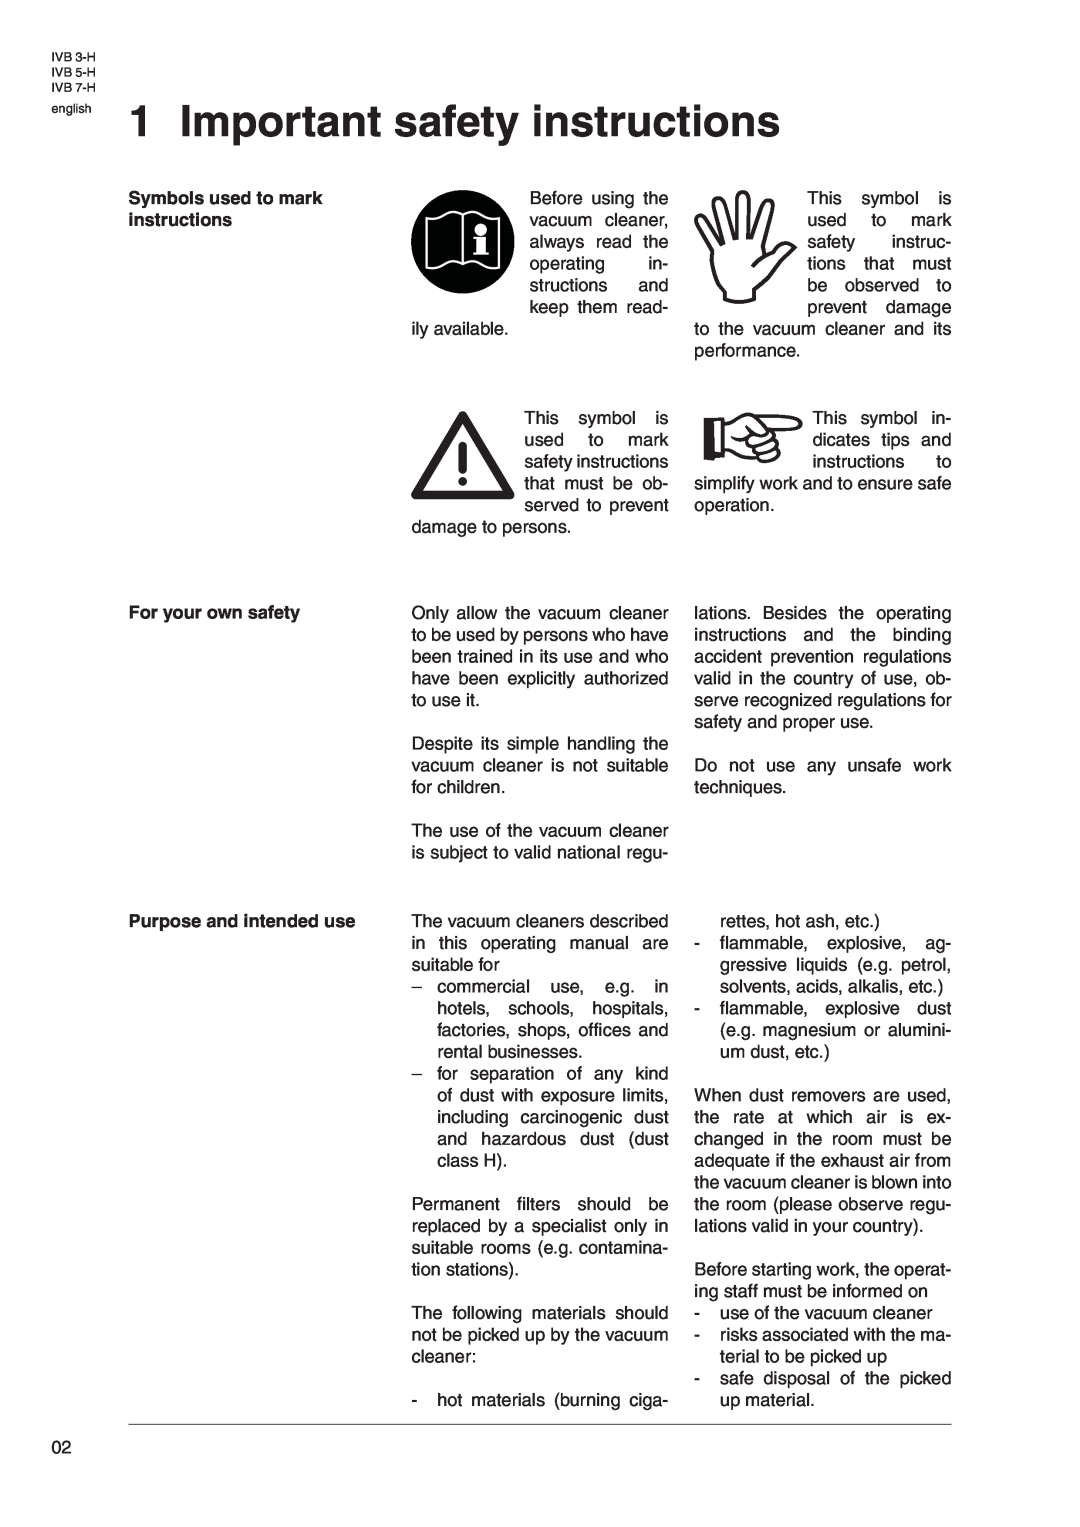 Nilfisk-Advance America IVB 3-H, IVB 7-H, IVB 5-H Important safety instructions, Symbols used to mark, For your own safety 